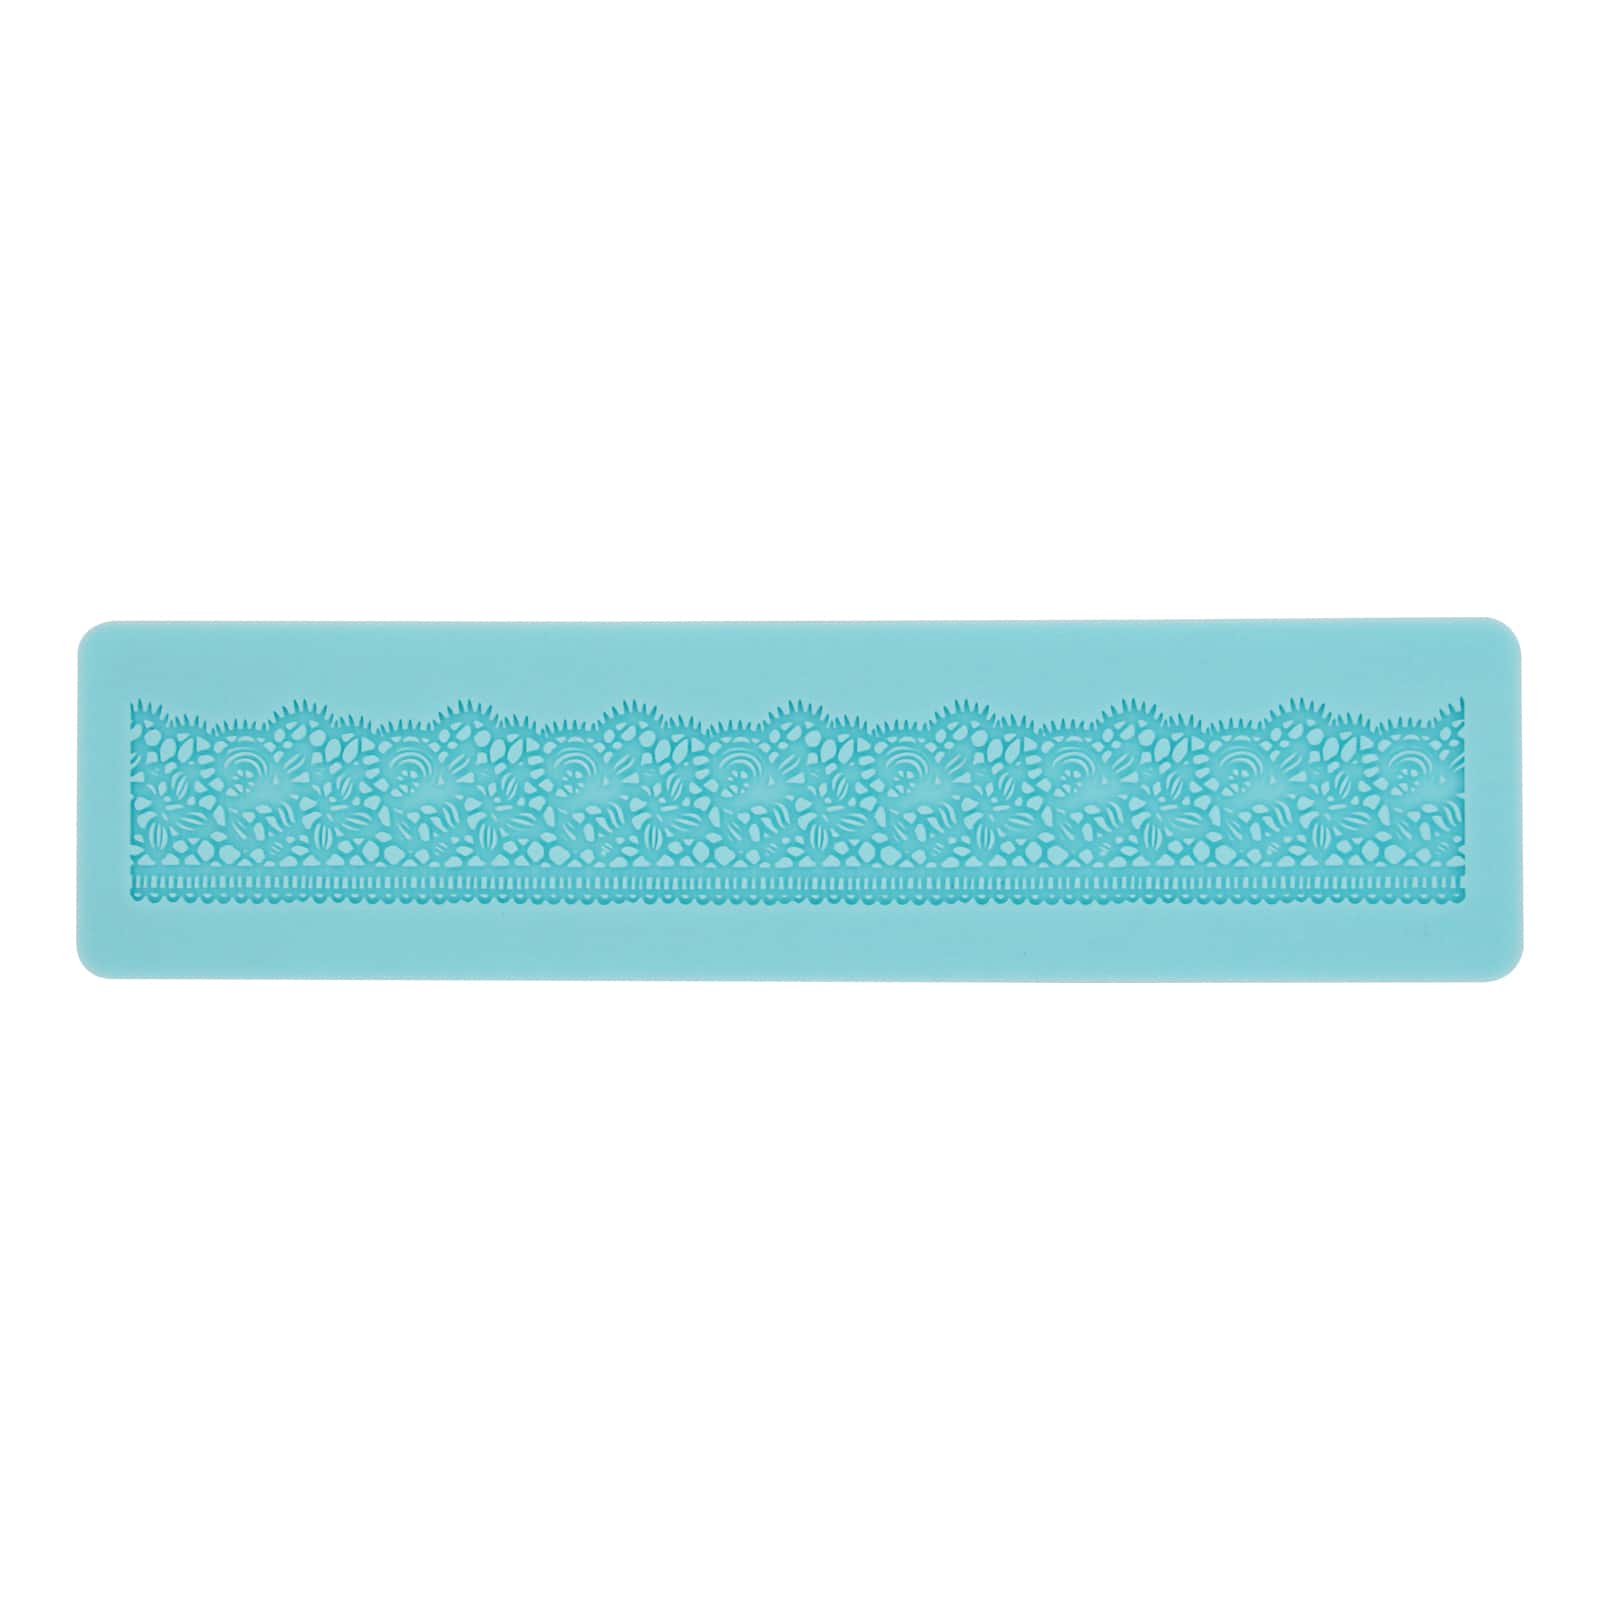 Flowers Silicone Fondant Mold by Celebrate It®, Michaels